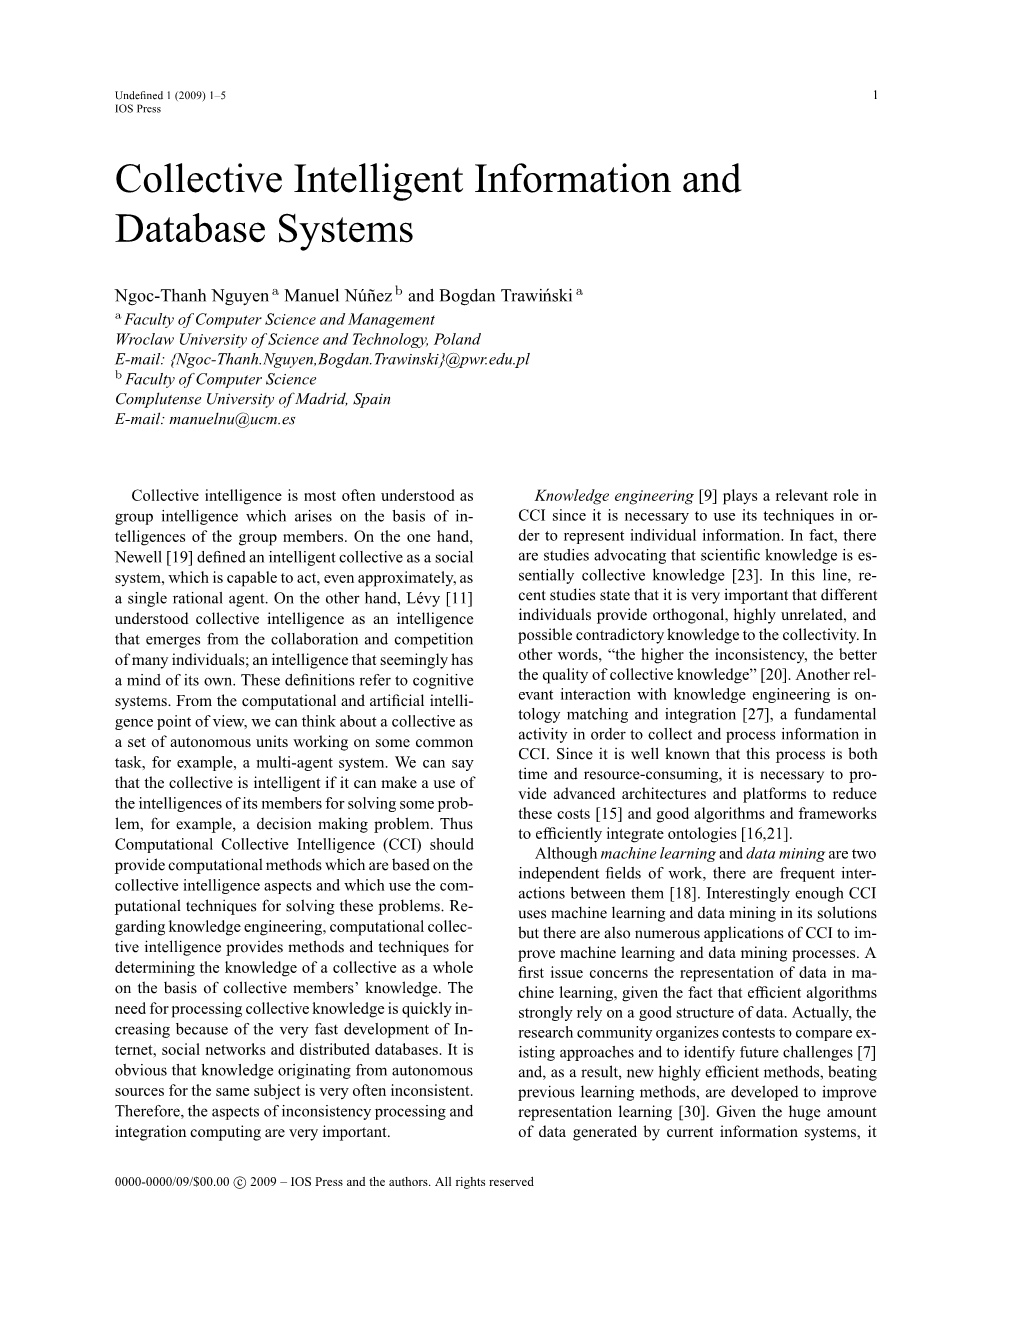 Collective Intelligent Information and Database Systems